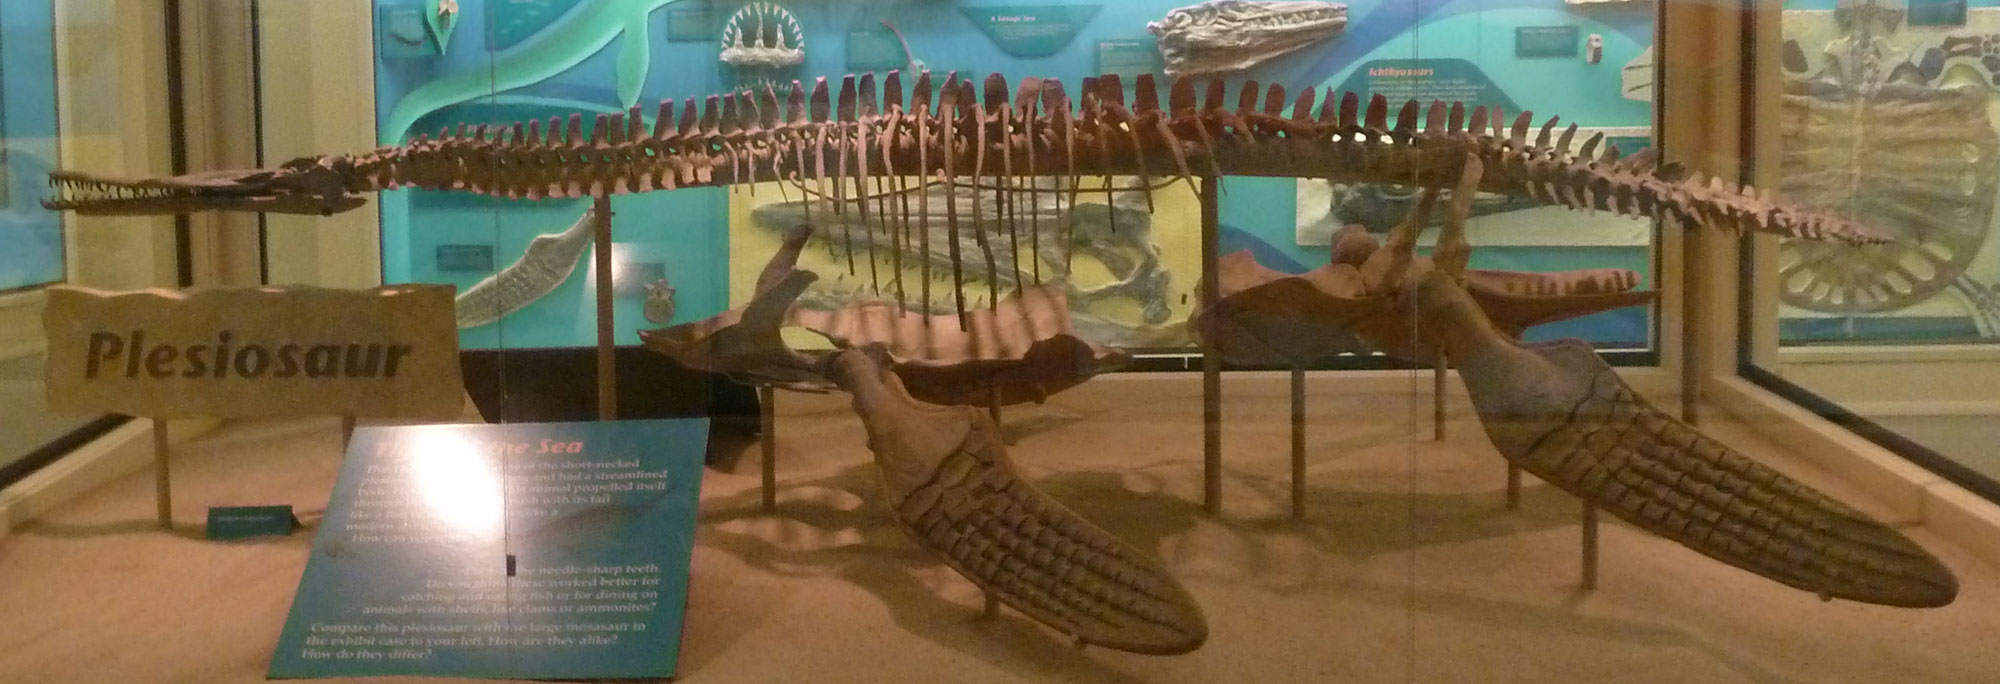 Photo of the mounted skeleton of the plesiosaur Dolichorhynchops on display. The skeleton has an elongated skull and four large flipper-like feet. The neck is somewhat elongated.